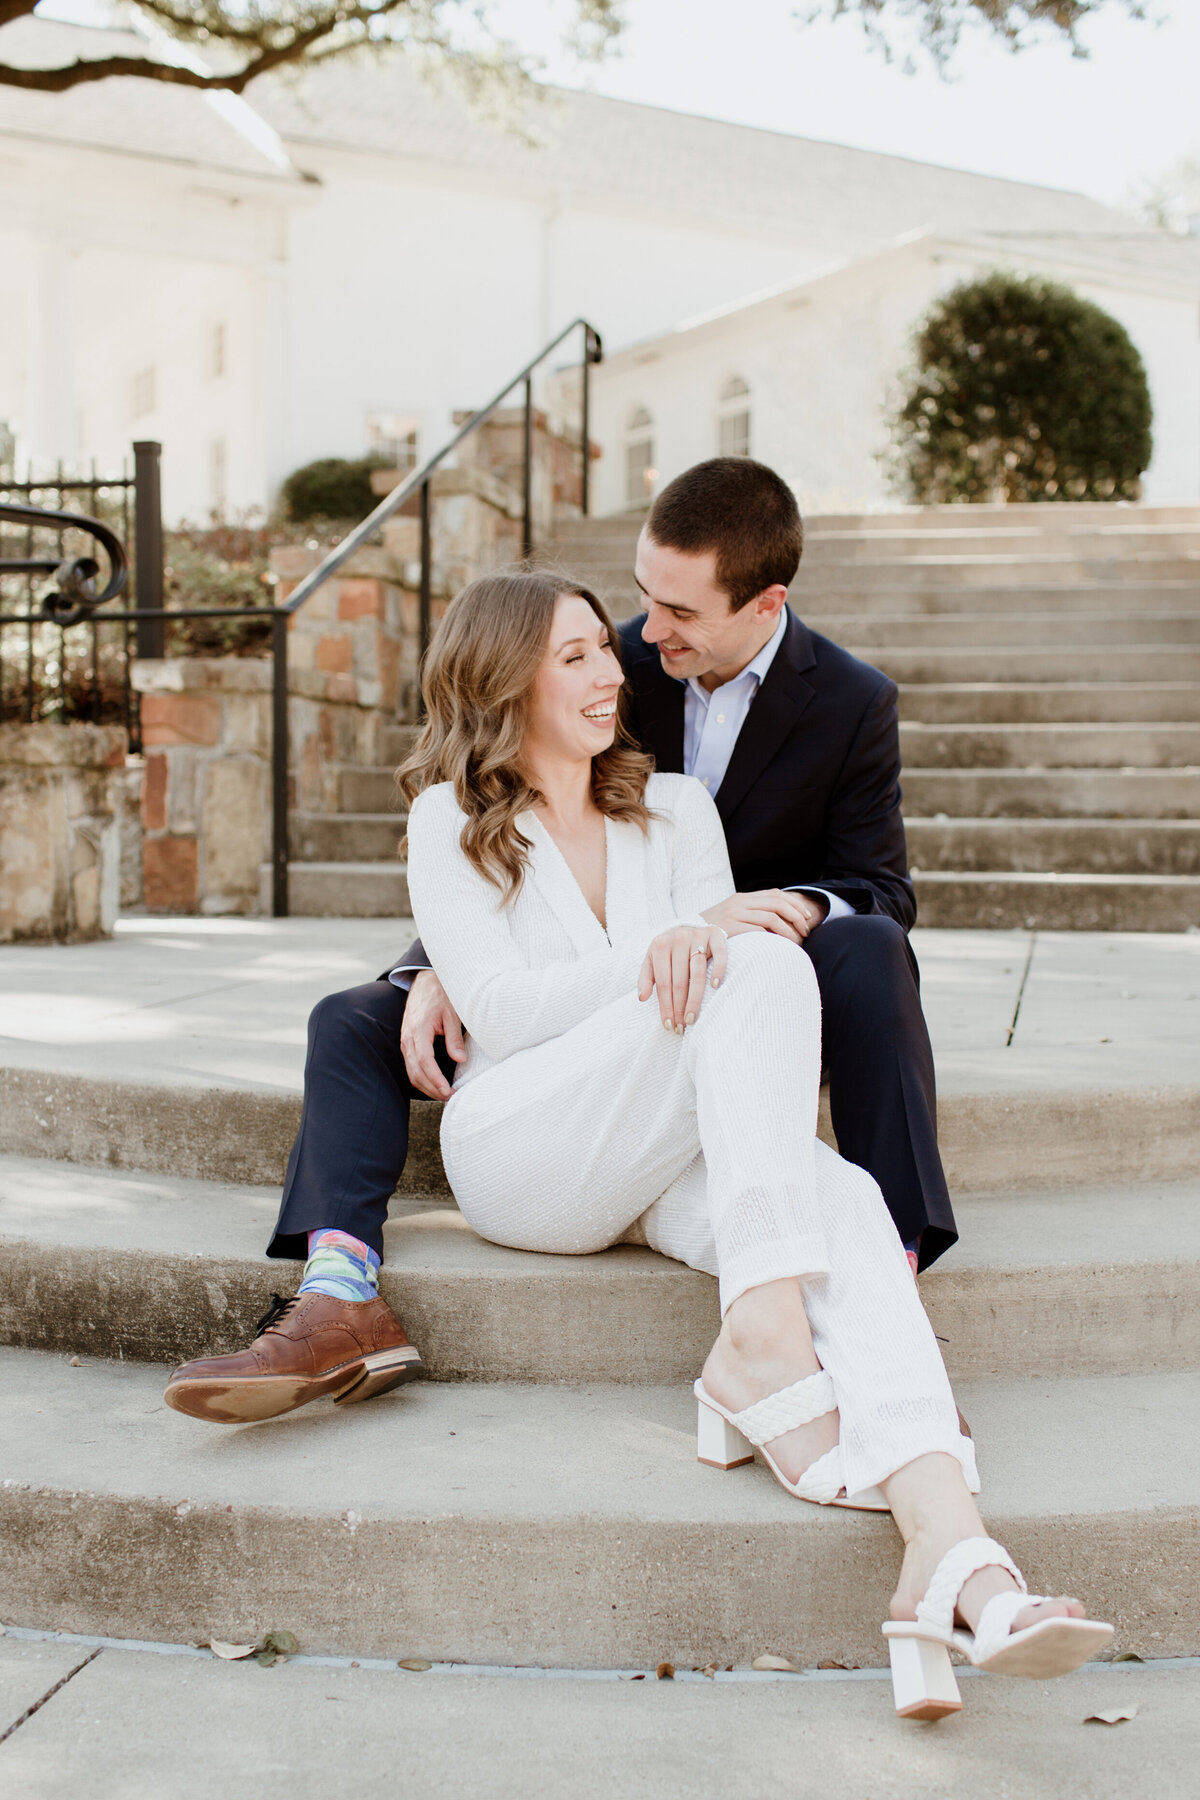 A Dallas elopement with a bride in a jumpsuit captured by Fort Worth wedding photographer, Megan Christine Studio